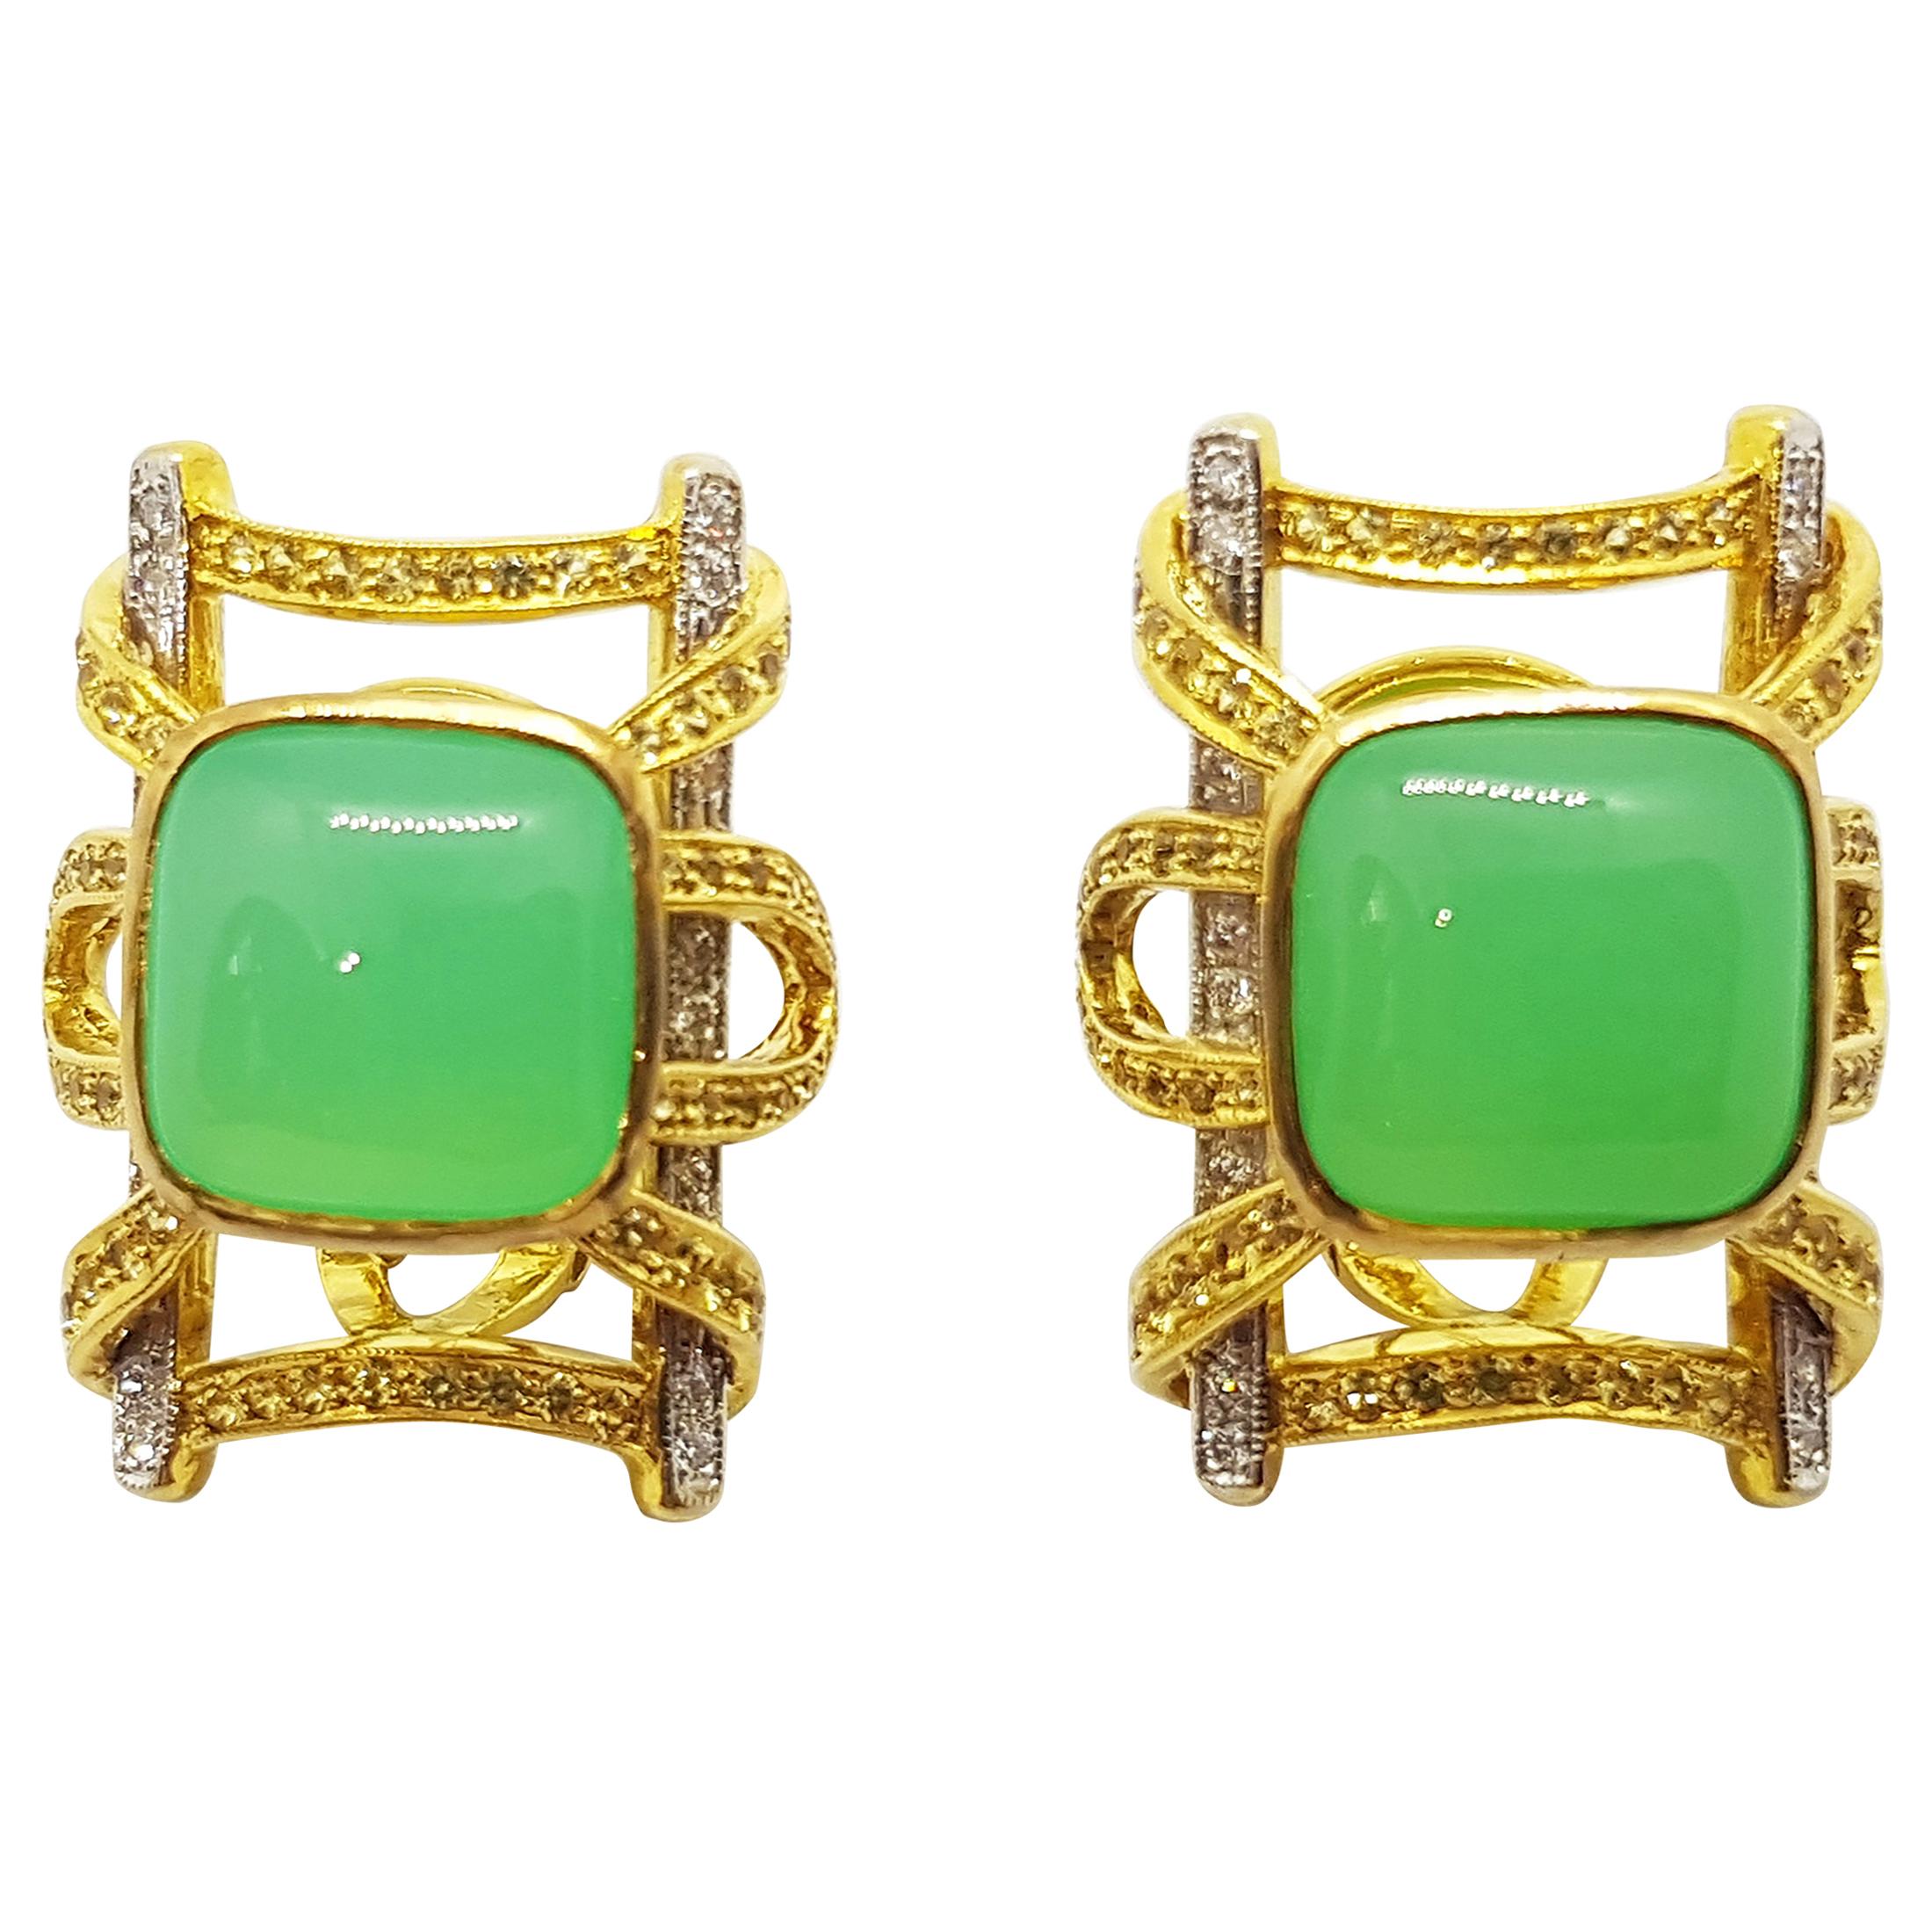 Chrysoprase, Yellow Sapphire and Diamond Earrings in 18K Gold